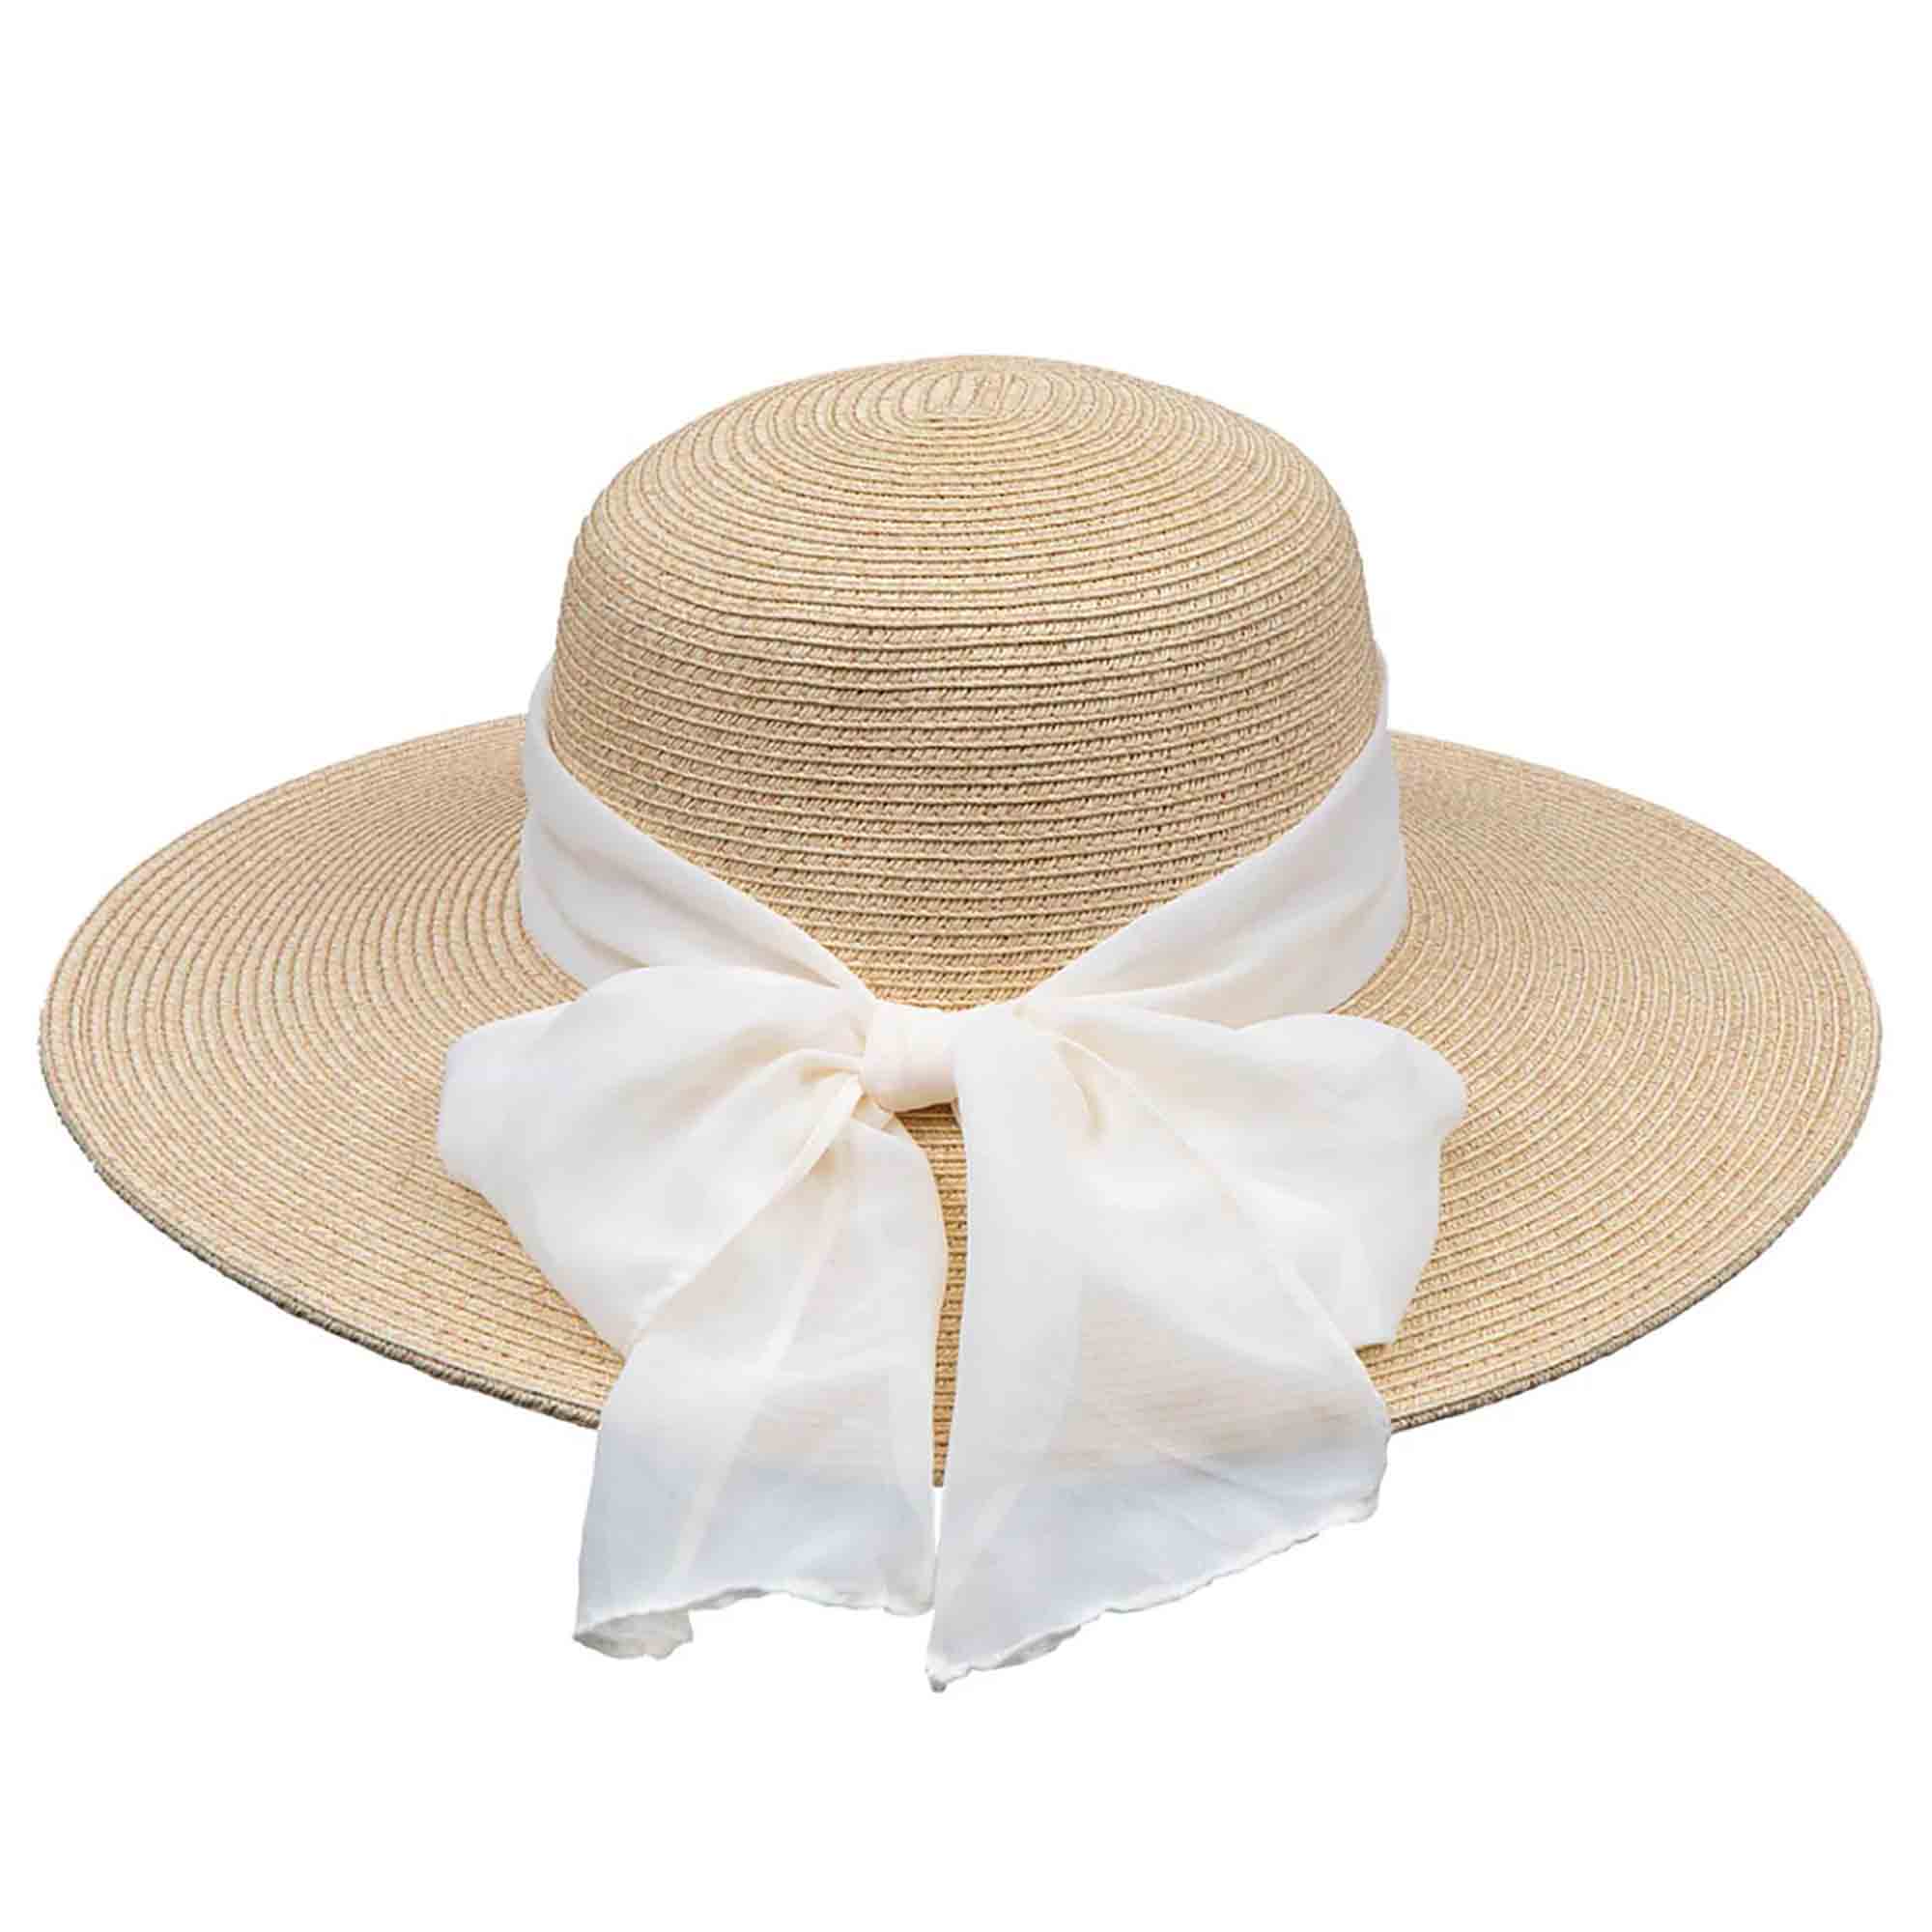 Straw Sun Hat with Chiffon Bow - Karen Keith Hats Wide Brim Sun Hat Great hats by Karen Keith BT31-N Natural M/L (58.5 cm) 